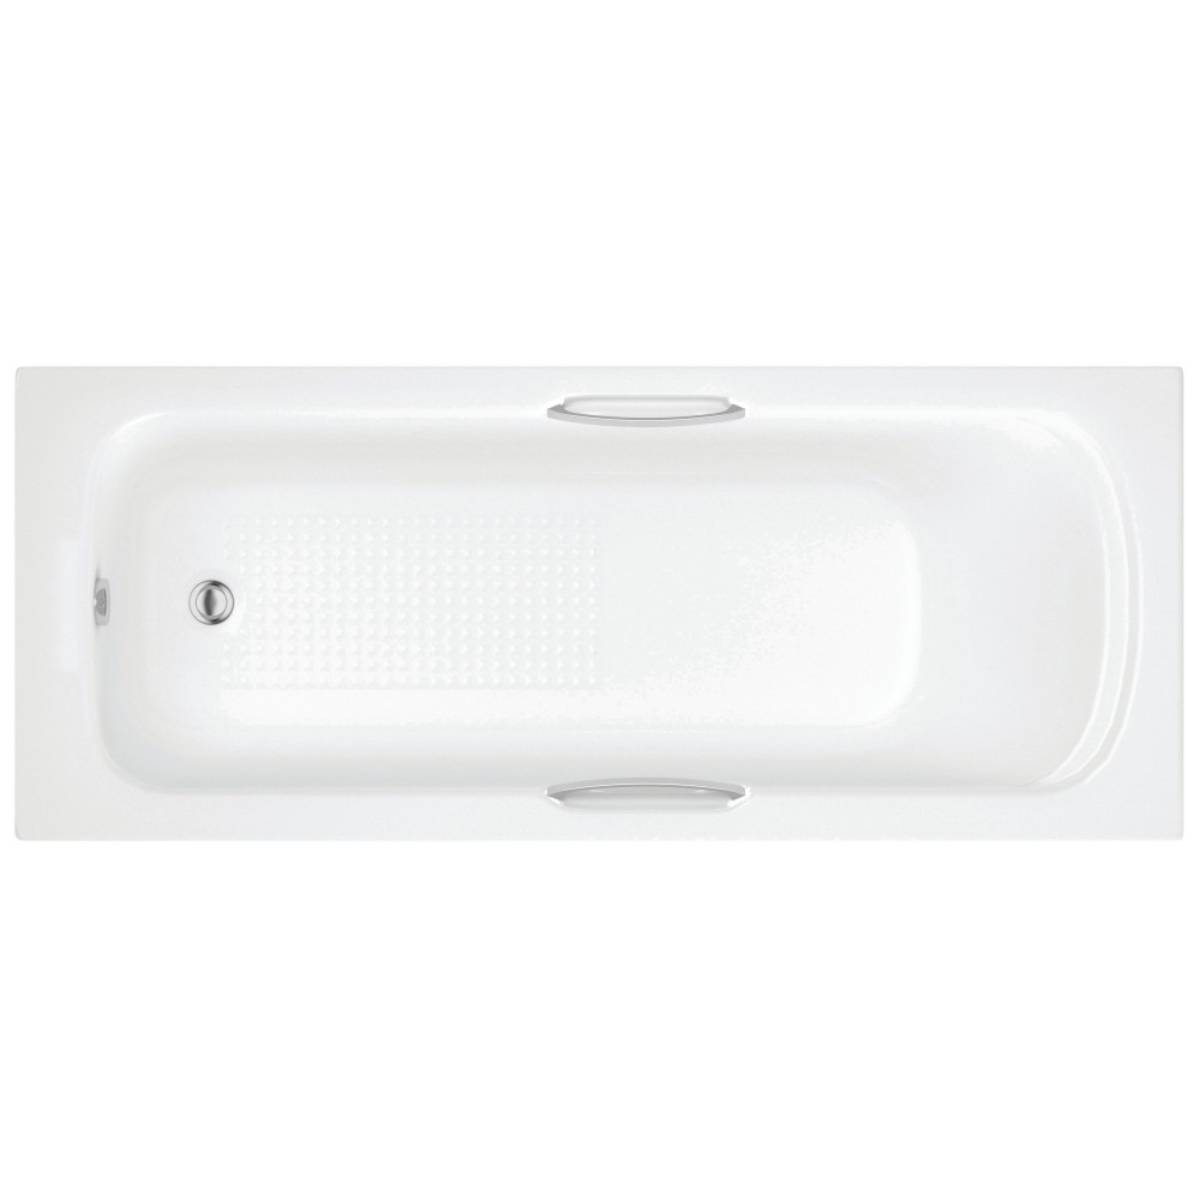 Moods Bathrooms to Love Granada II Supercast 1700 x 700mm Single Ended Bath with Anti Slip Twin Grip (8089)